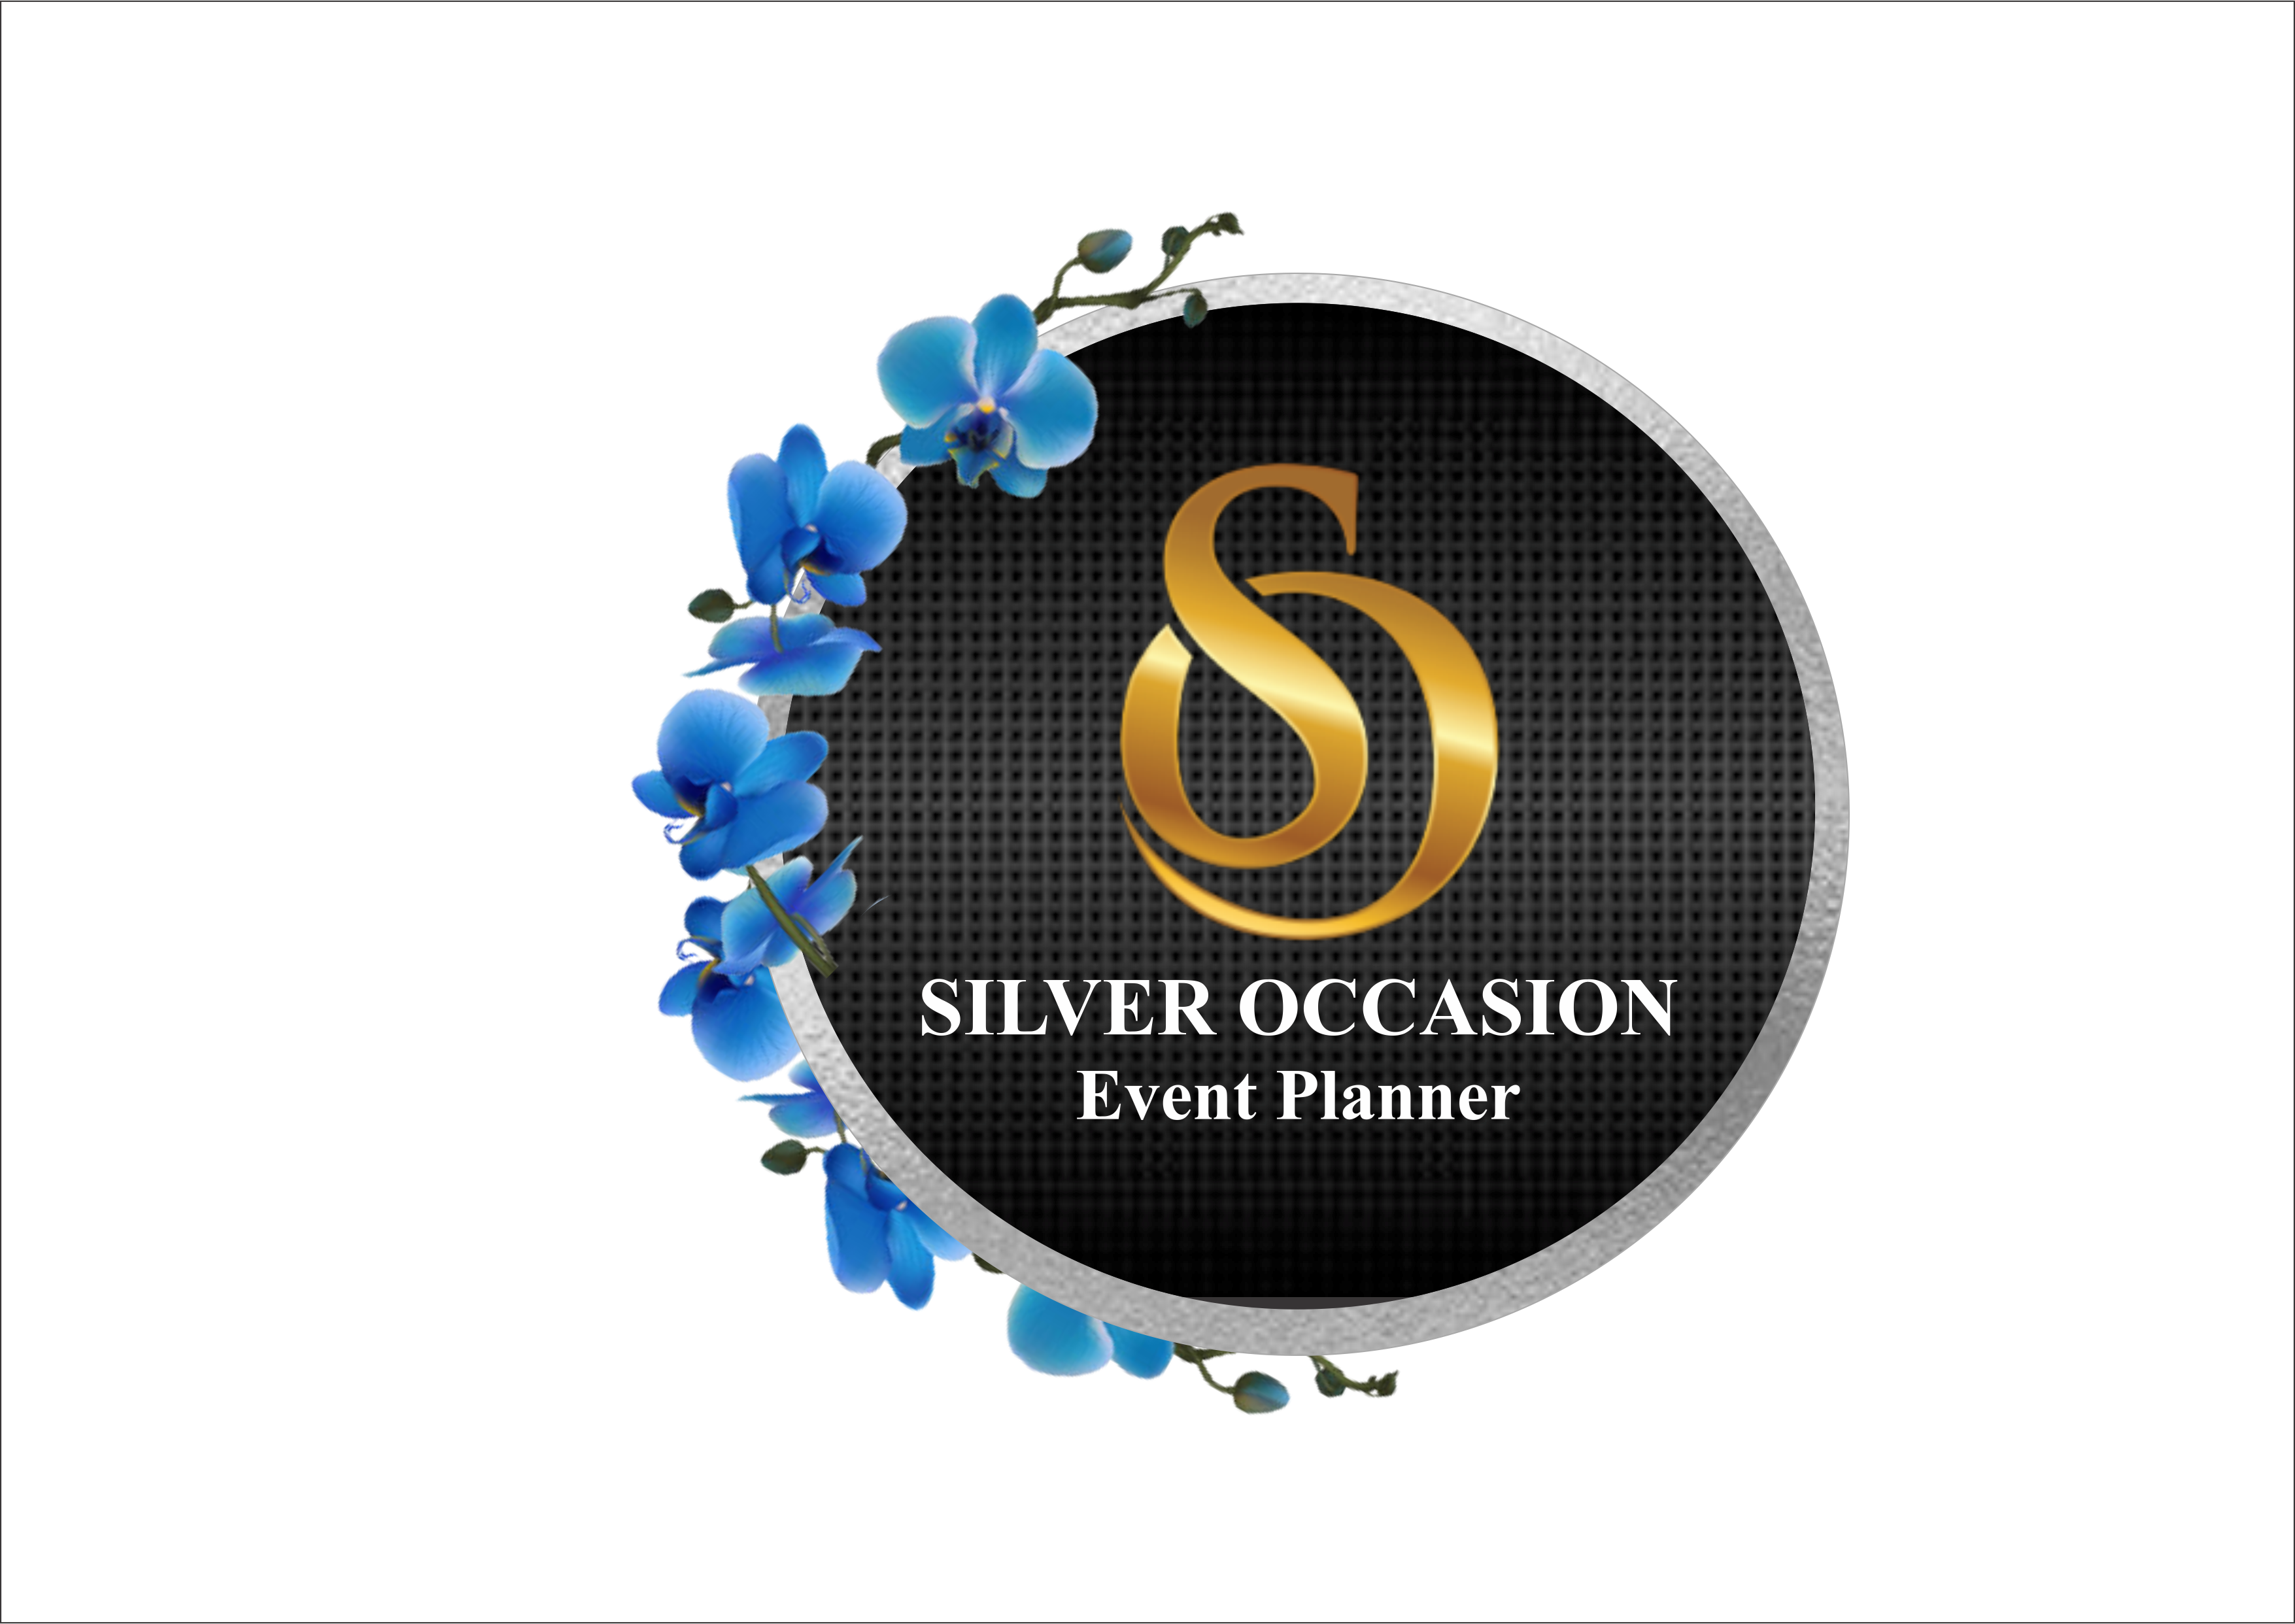 Silver occasions